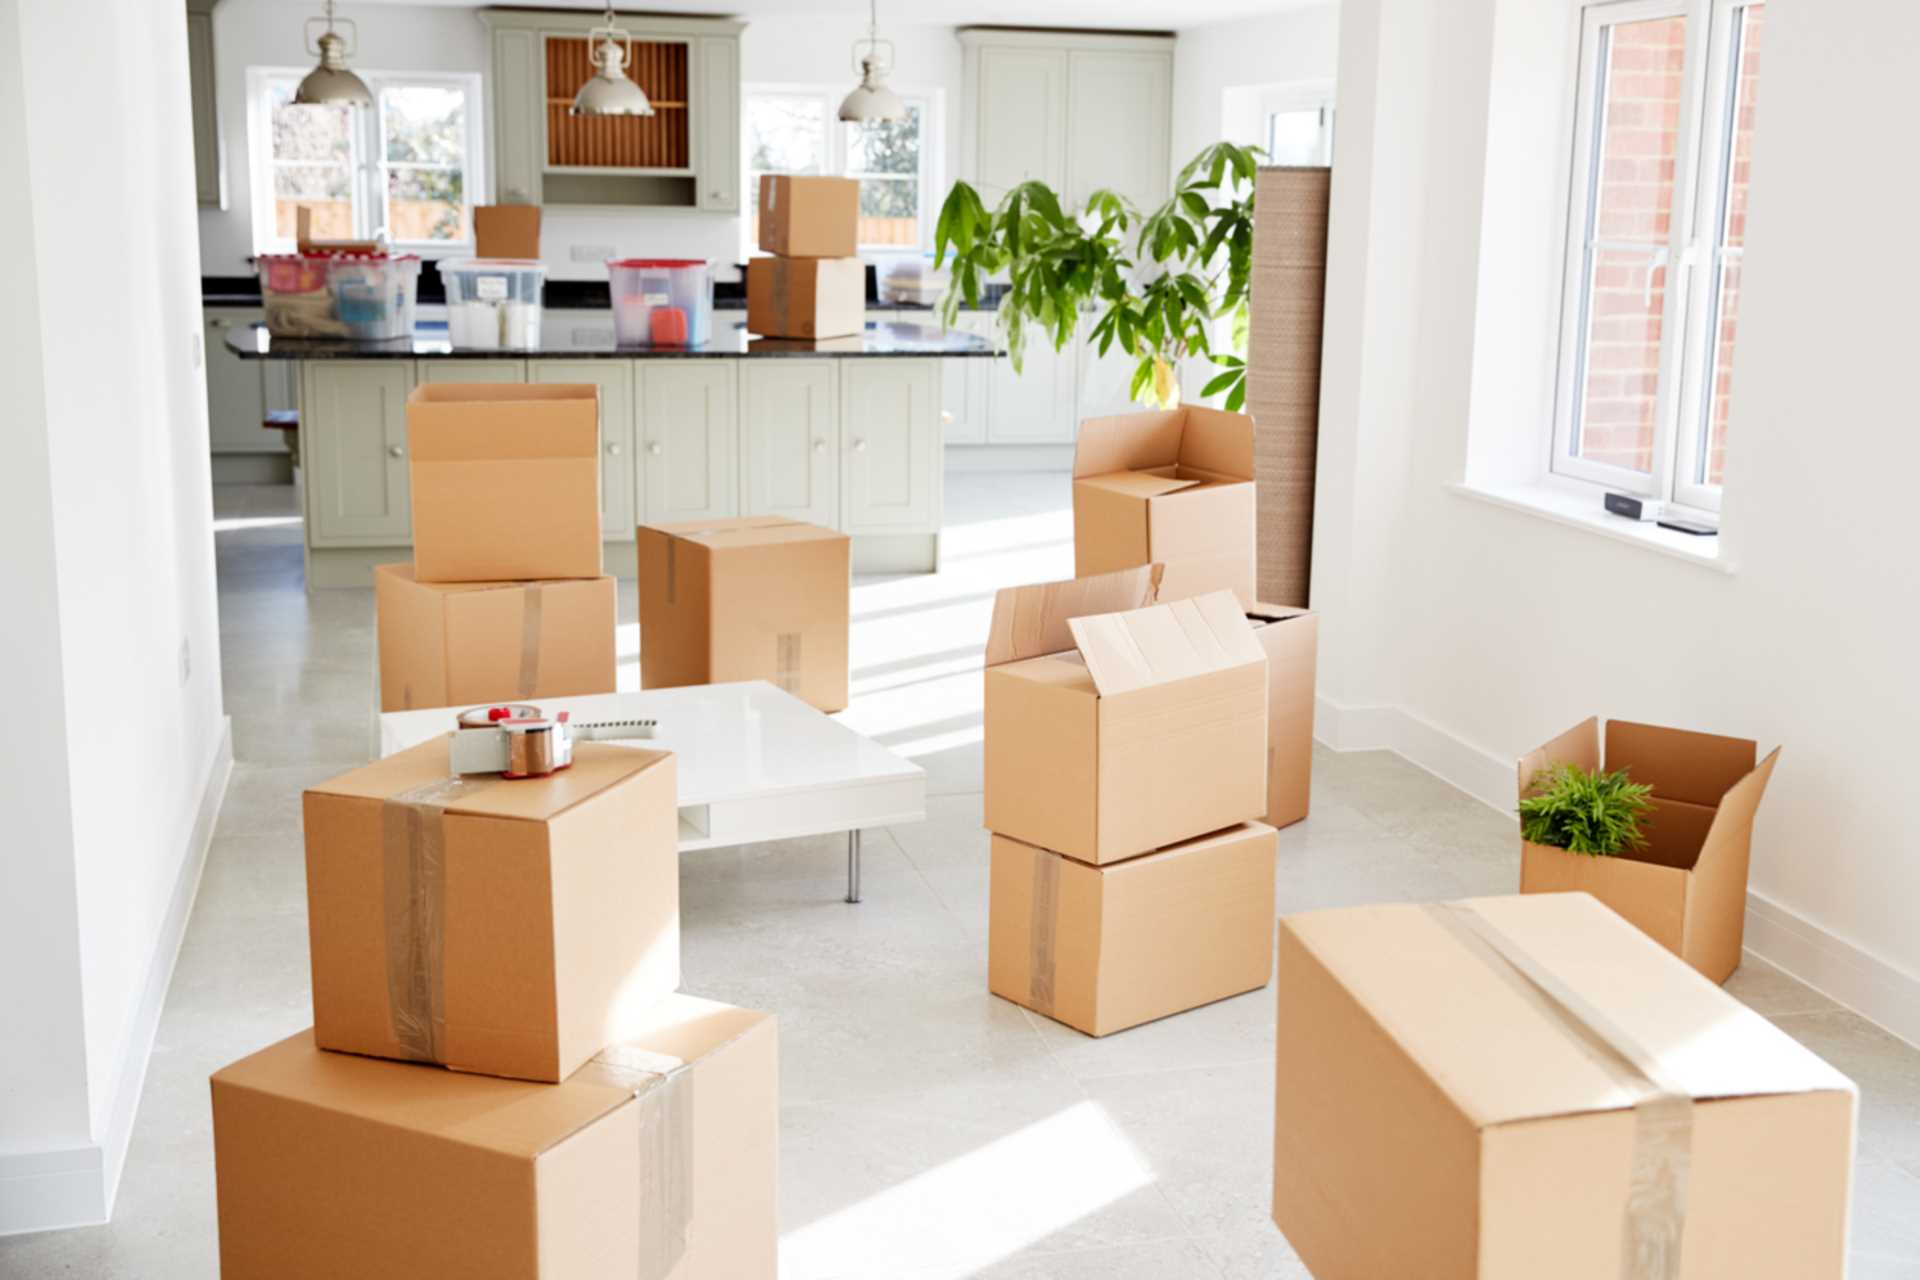 Ten tips on how to move home, Stress free!